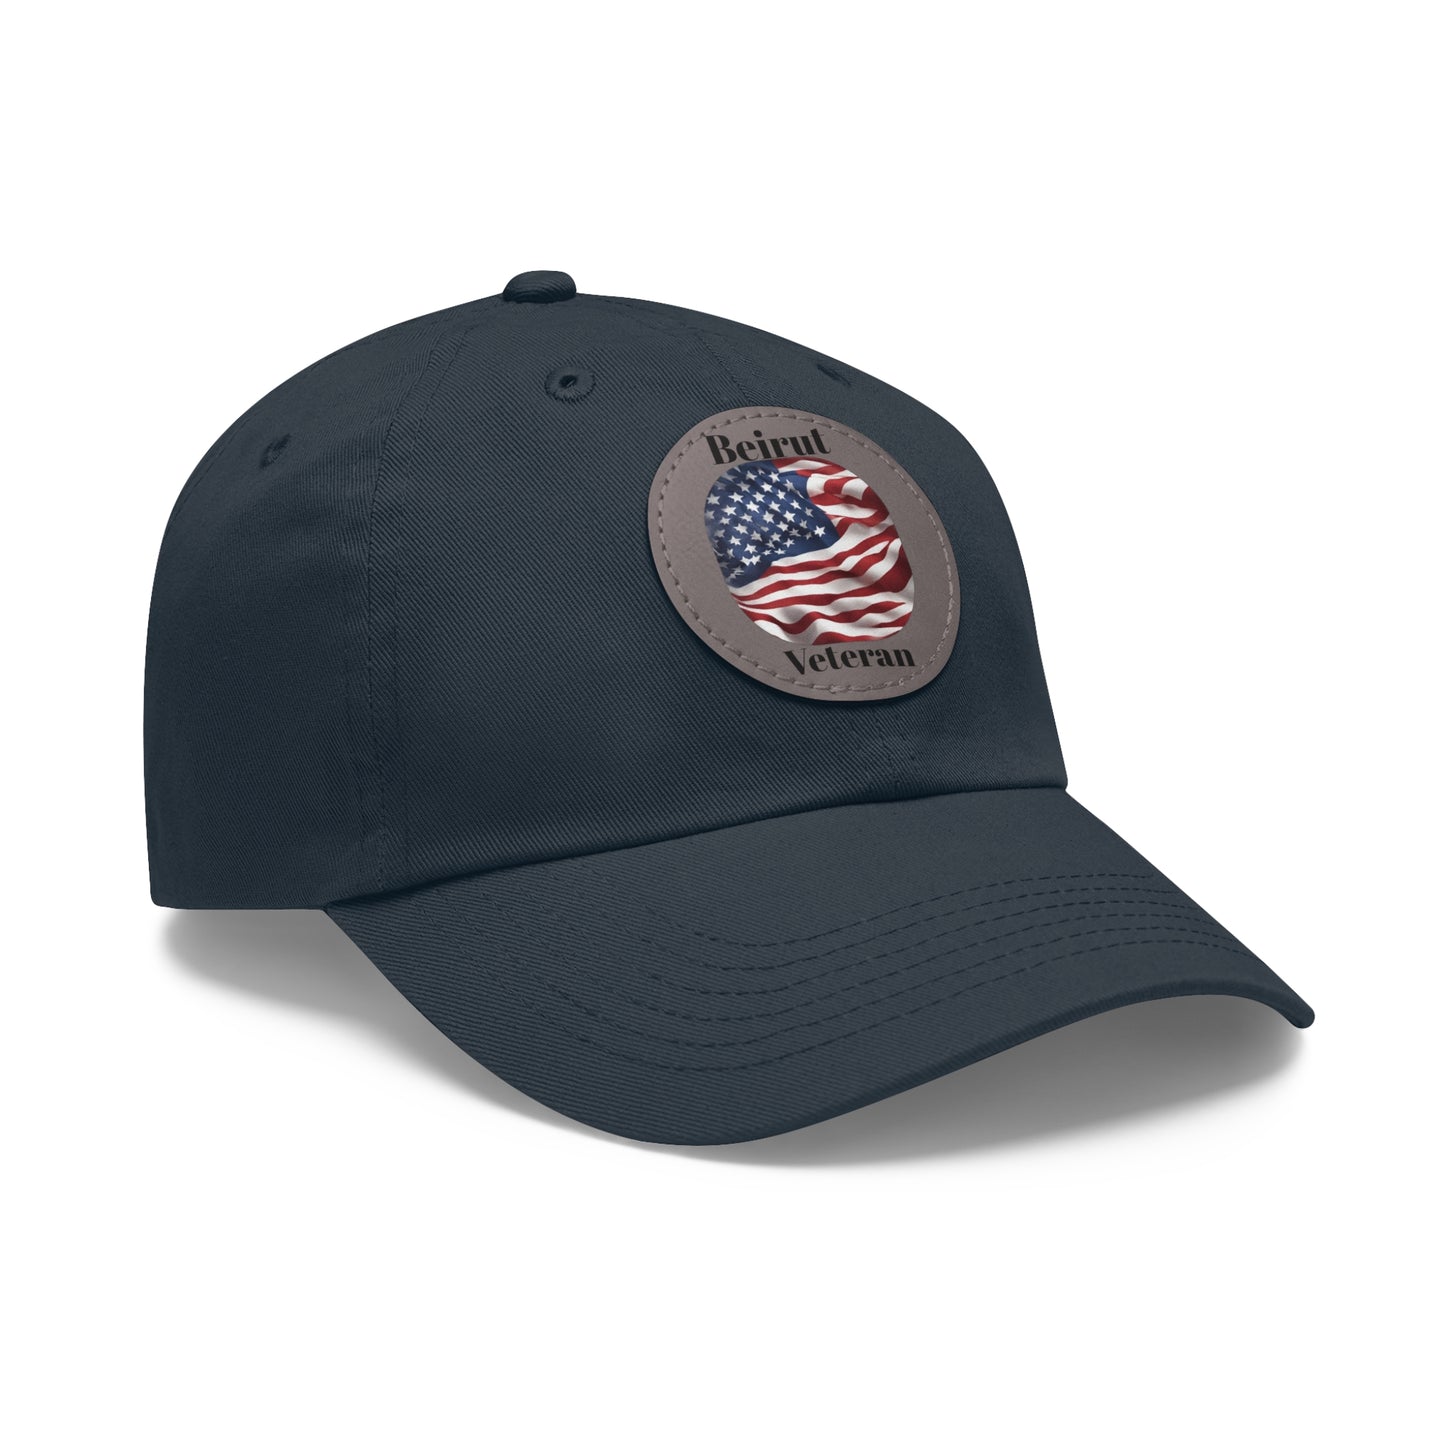 Beirut Veteran Hat with Leather Patch (Round)